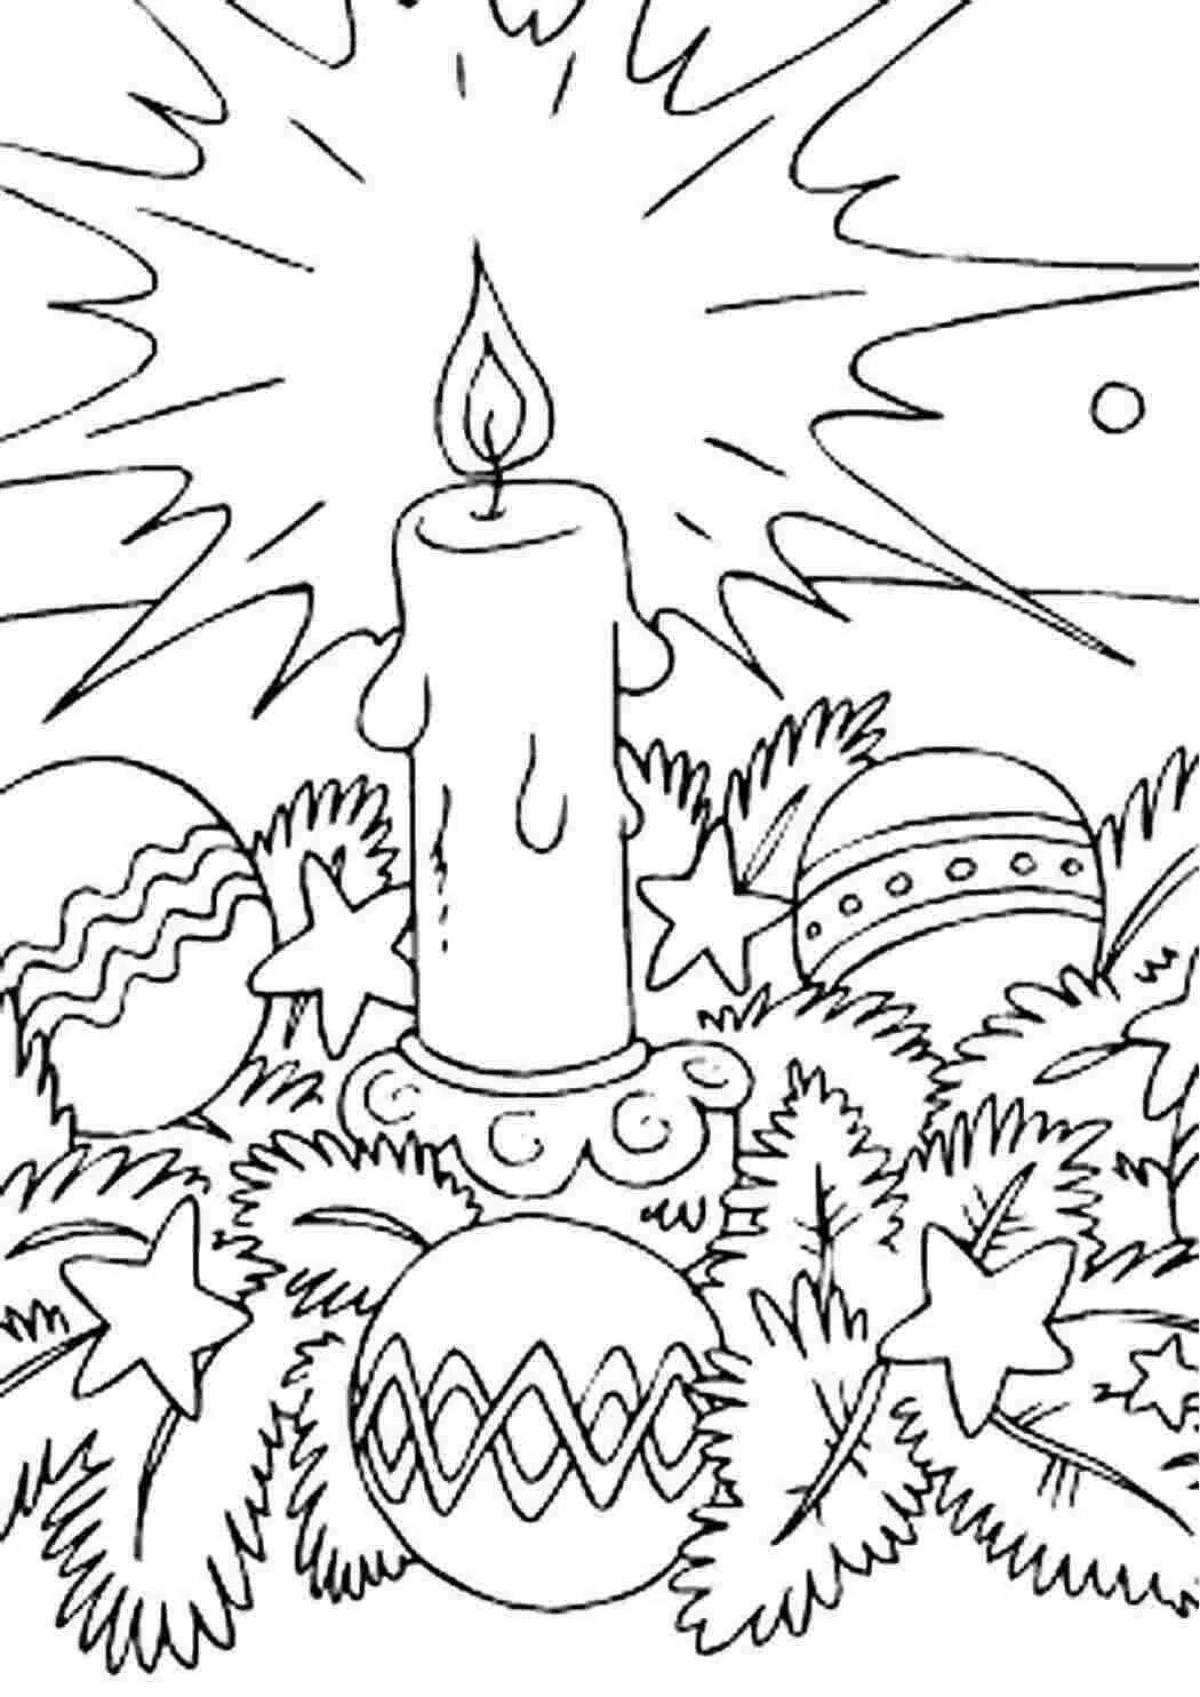 Merry Christmas Candle coloring page